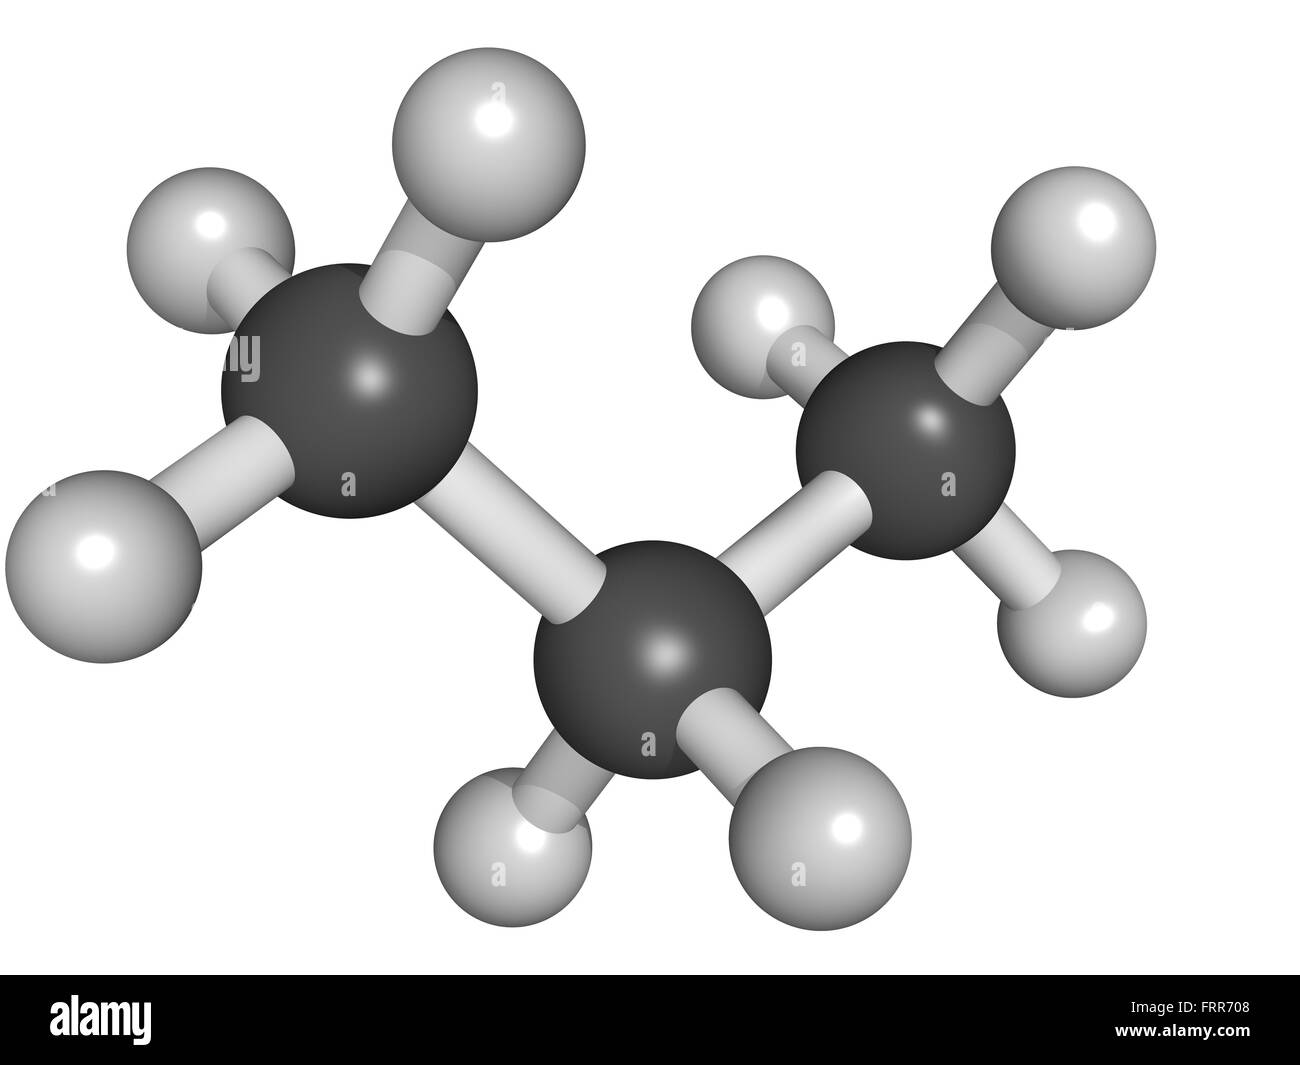 Chemical structure of propane, used as a fuel for engines, oxy-gas torches, barbecues, portable stoves, and residential central Stock Photo